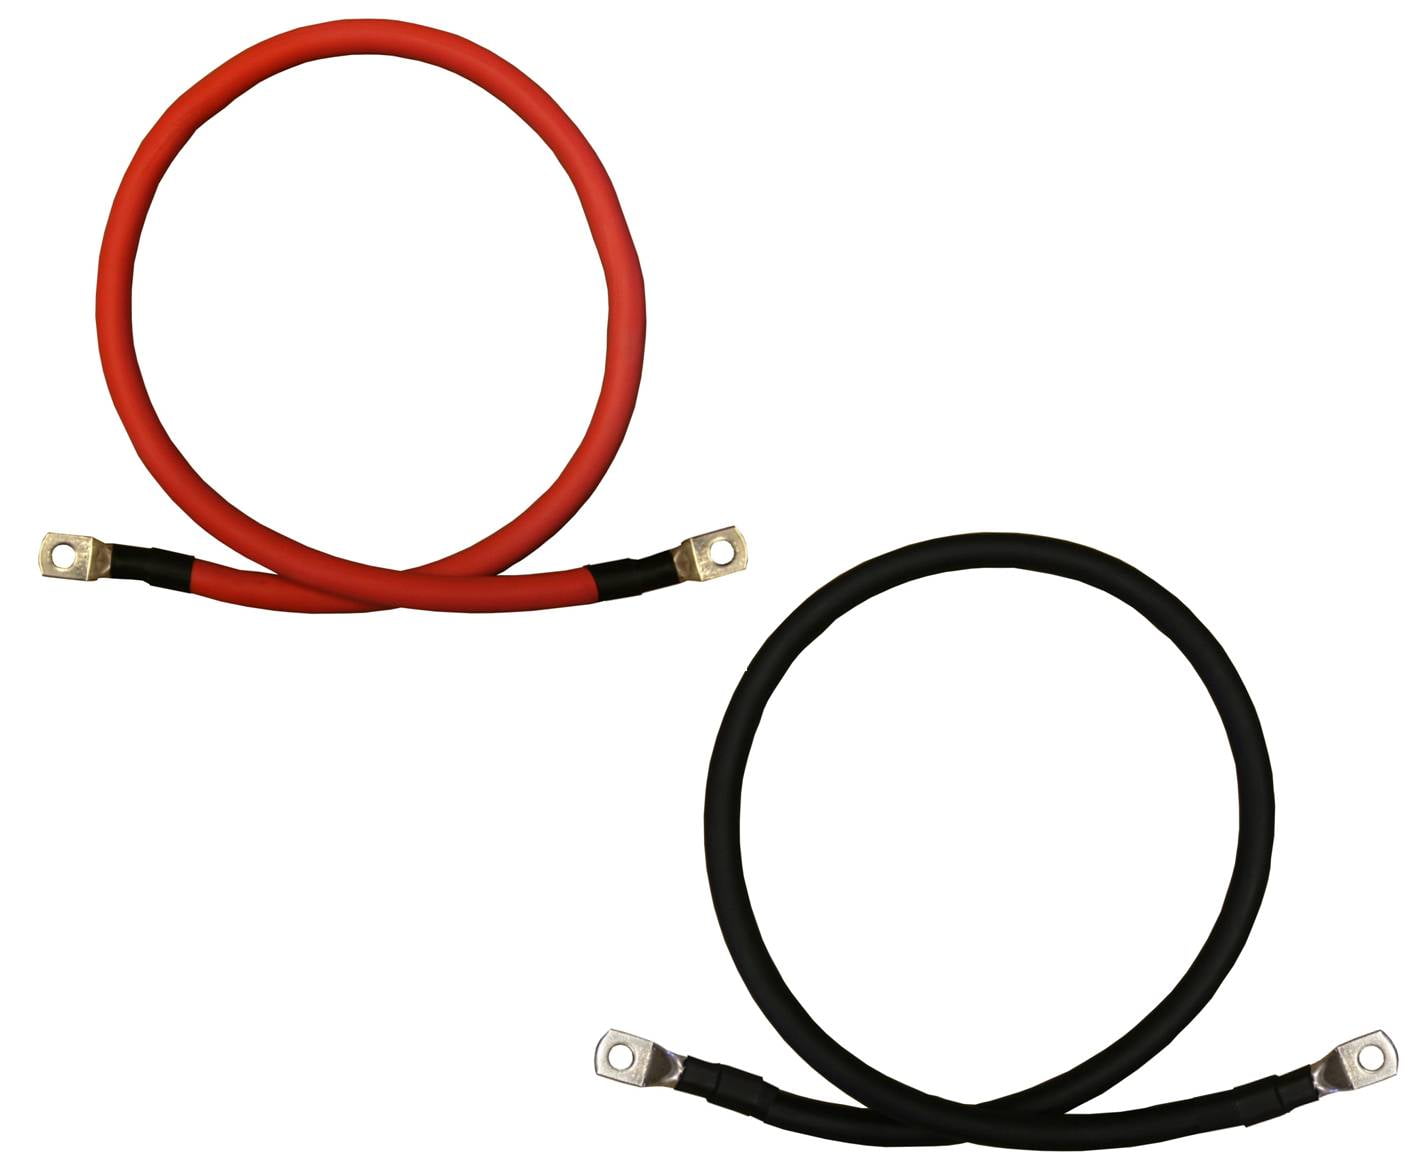 3 Feet Heat Shrink Tubing WNI 4/0 AWG 4/0 Gauge 15 Feet Red Battery Welding Pure Copper Ultra Flexible Cable 5pcs of 5/16 & 5pcs 3/8 Copper Cable Lug Terminal Connectors 